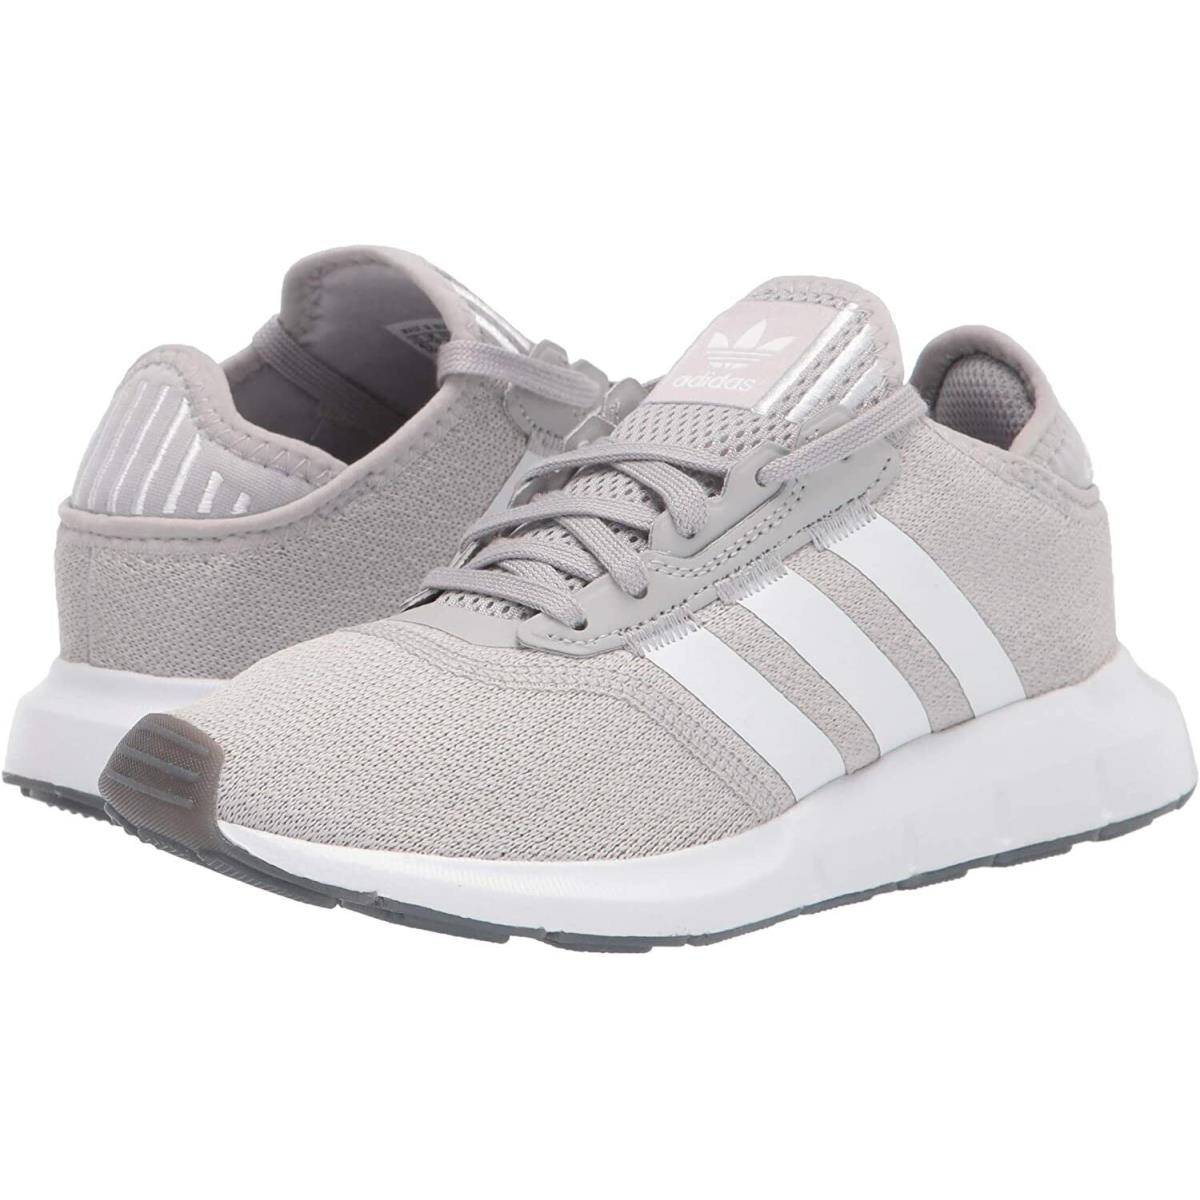 Women`s Shoes Adidas Swift Run X Casual Athletic Sneakers FY2135 Grey White